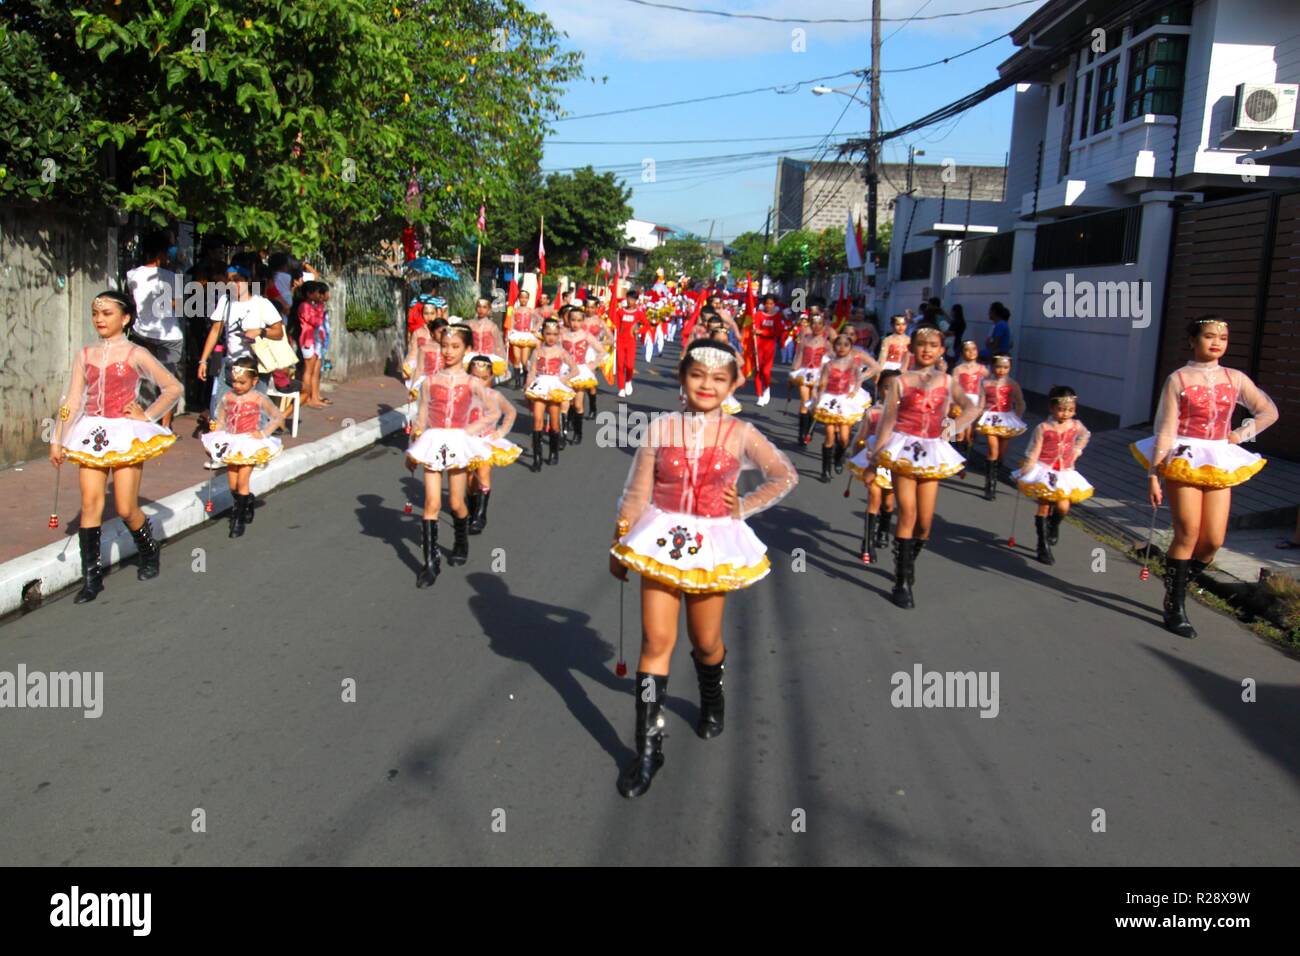 Philippines. 18th Nov, 2018. Majoret performed performed during the Higantes (Giant) effigy marches on the streets town of Angono province of Rizal on November 18, 2018. Higantes Festival is celebrated November in the city of Angono, Province of Rizal in the Philippines to honor San Clemente, the patron saint of fishermen. The festival features a parade of hundreds of higantes, papier-mâché giants. Higantes (Giant) are puppets rendered as man or woman in various costumes; their face gives a commanding look, their hands on the waist. Credit: Gregorio B. Dantes Jr./Pacific Press/Alamy Live News Stock Photo